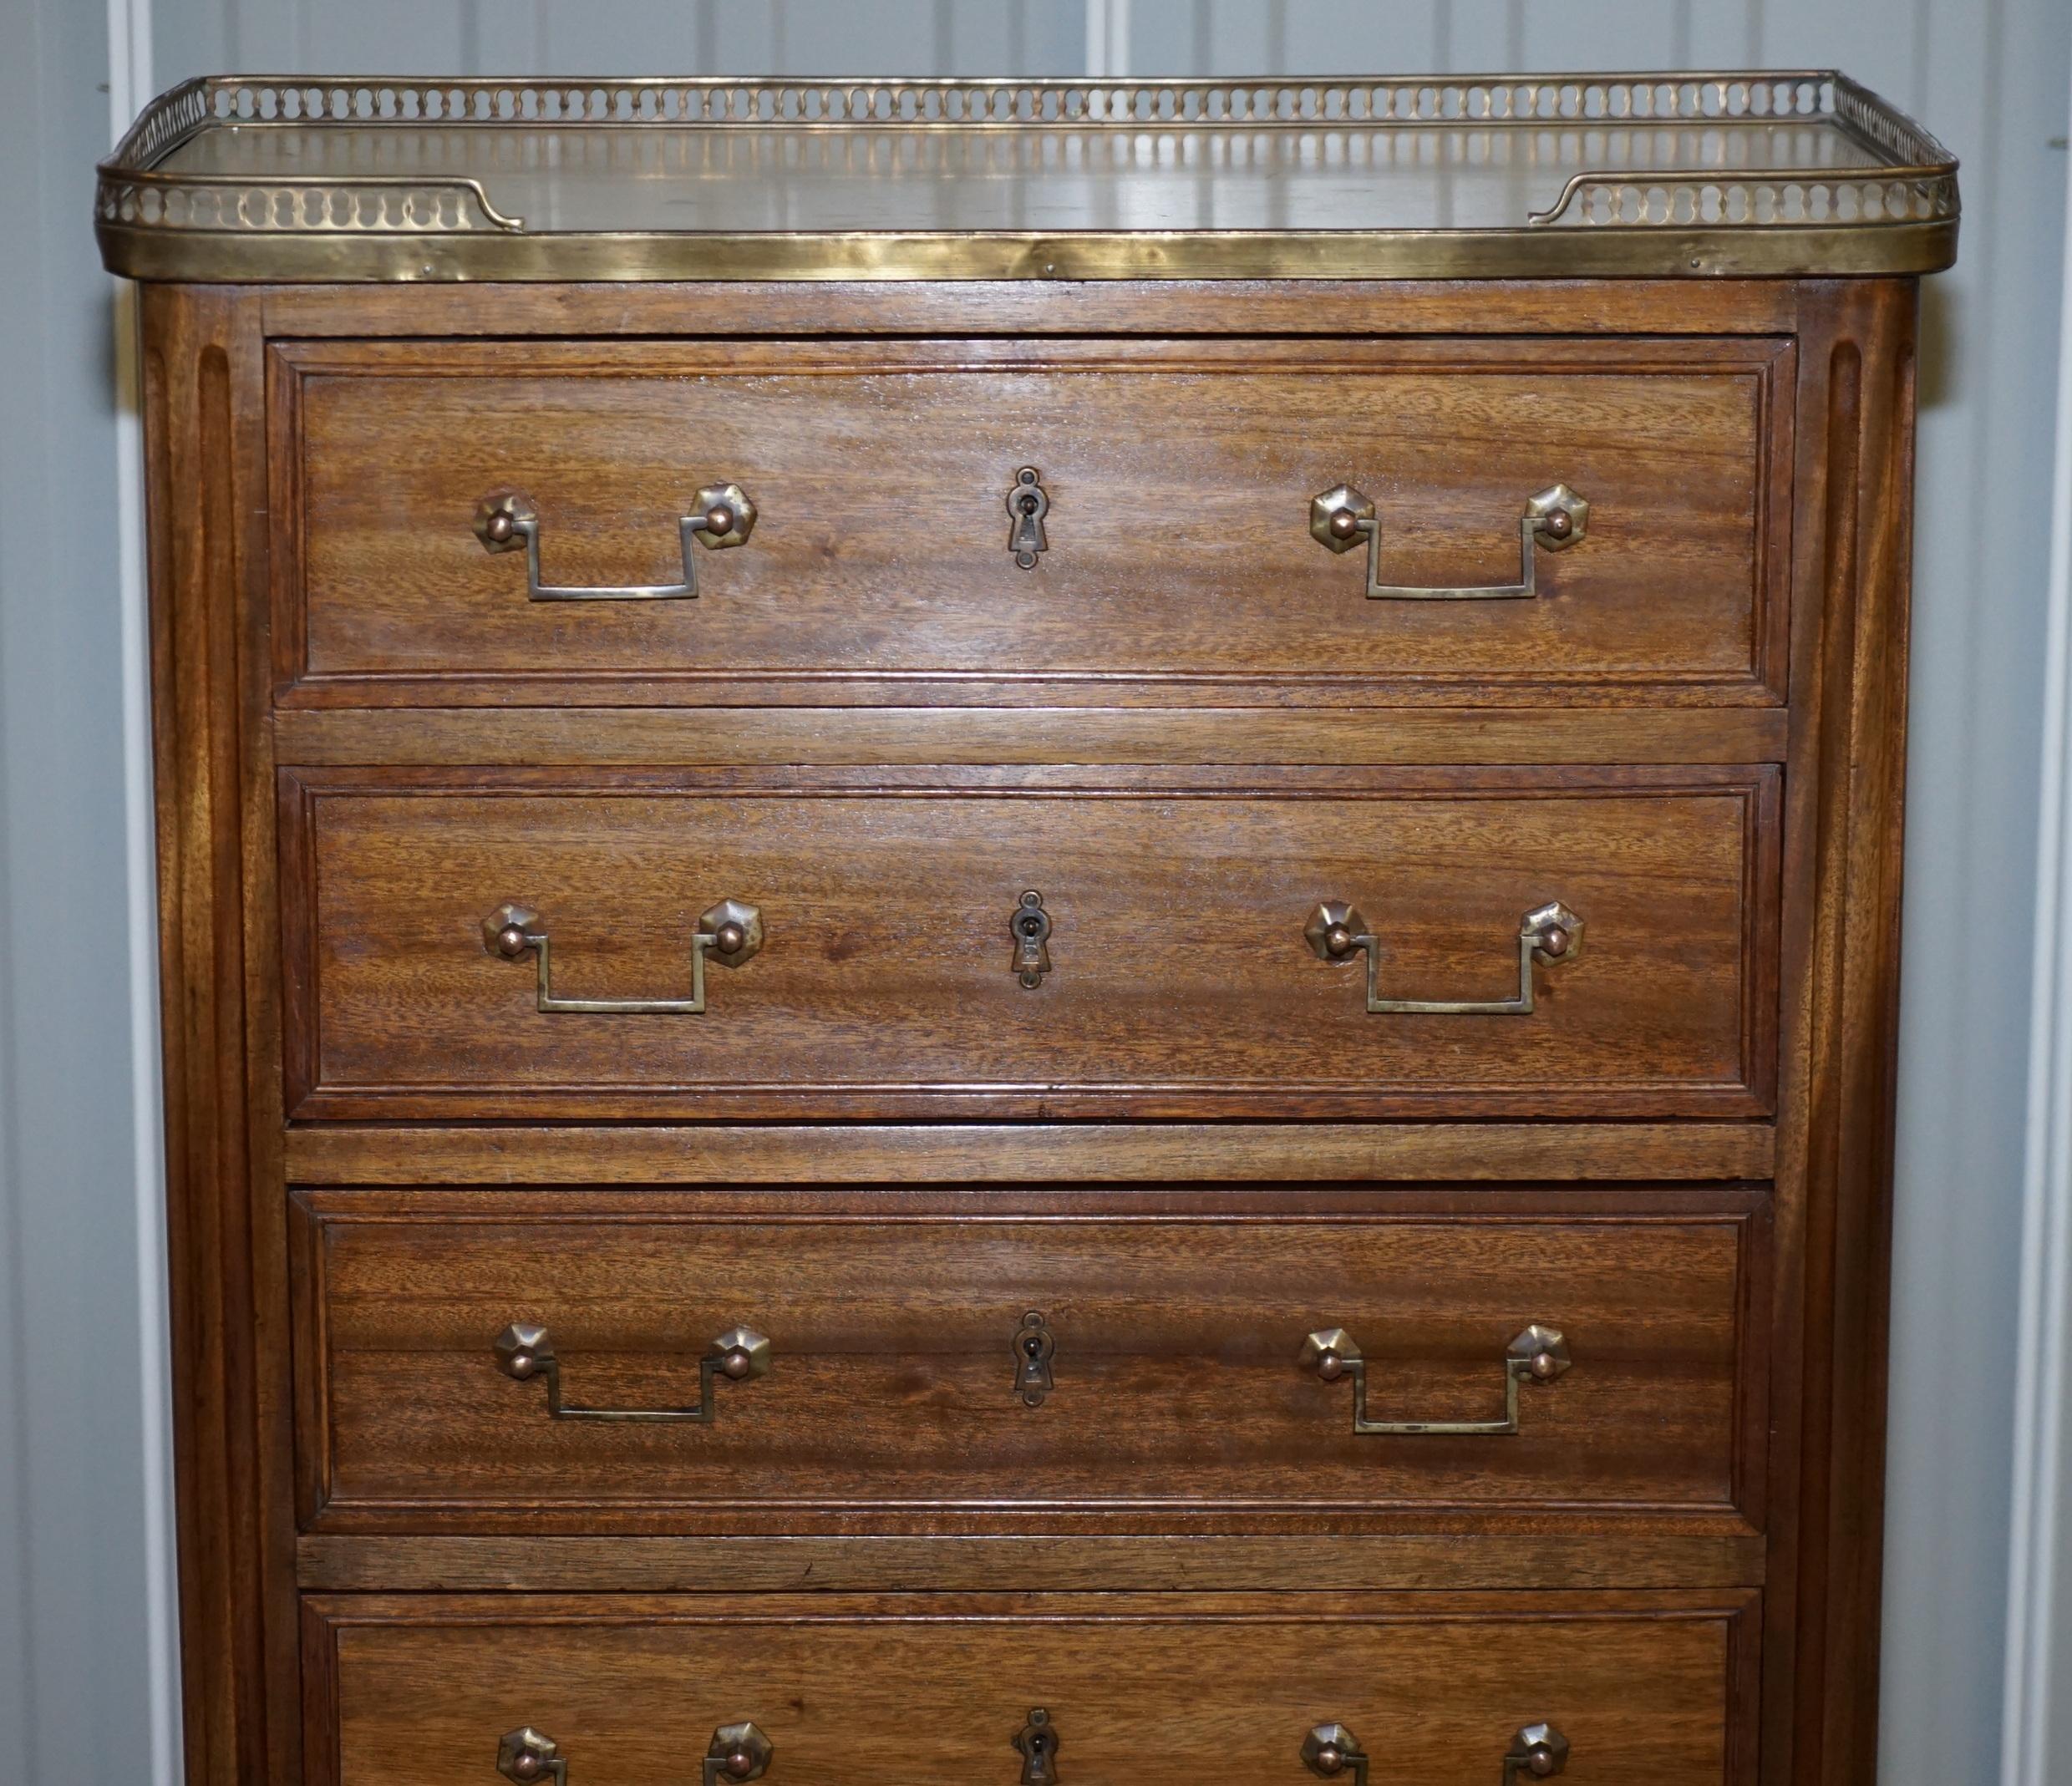 Rare 19th Century French Marble Topped Brass Gallery Semainier Chest of Drawers For Sale 3